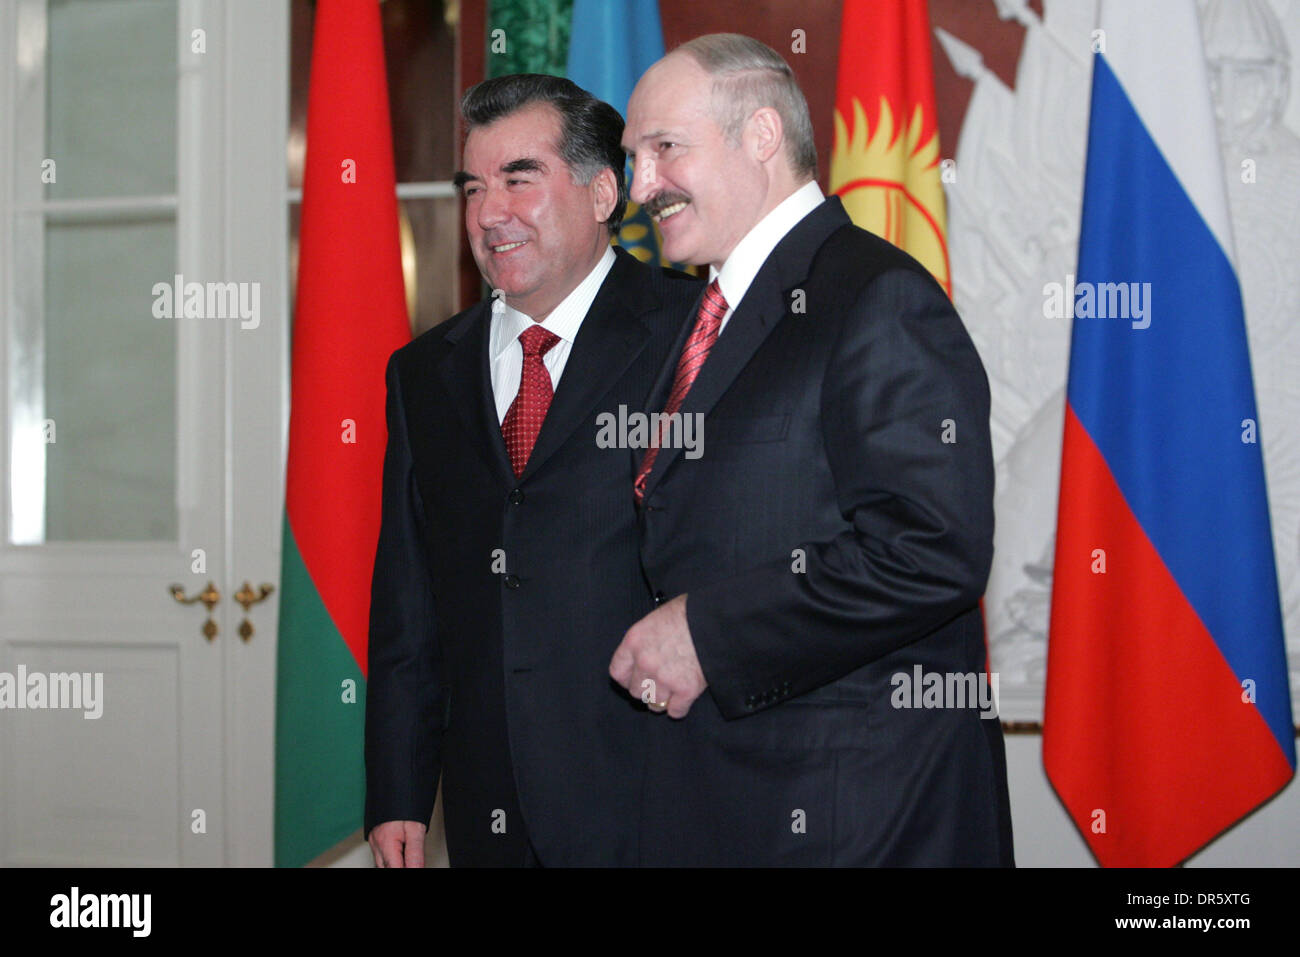 Feb 04, 2009 - Moscow, Russia - President of Belarus ALEXANDER LUKASHENKO (r) and President of Tajikistan EMOMALI RAKHMON (l) at Collective Security Treaty Organization Summit in Moscow to focus on setting up a joint military force. (Credit Image: © PhotoXpress/ZUMA Press) RESTRICTIONS: * North and South America Rights Only * Stock Photo